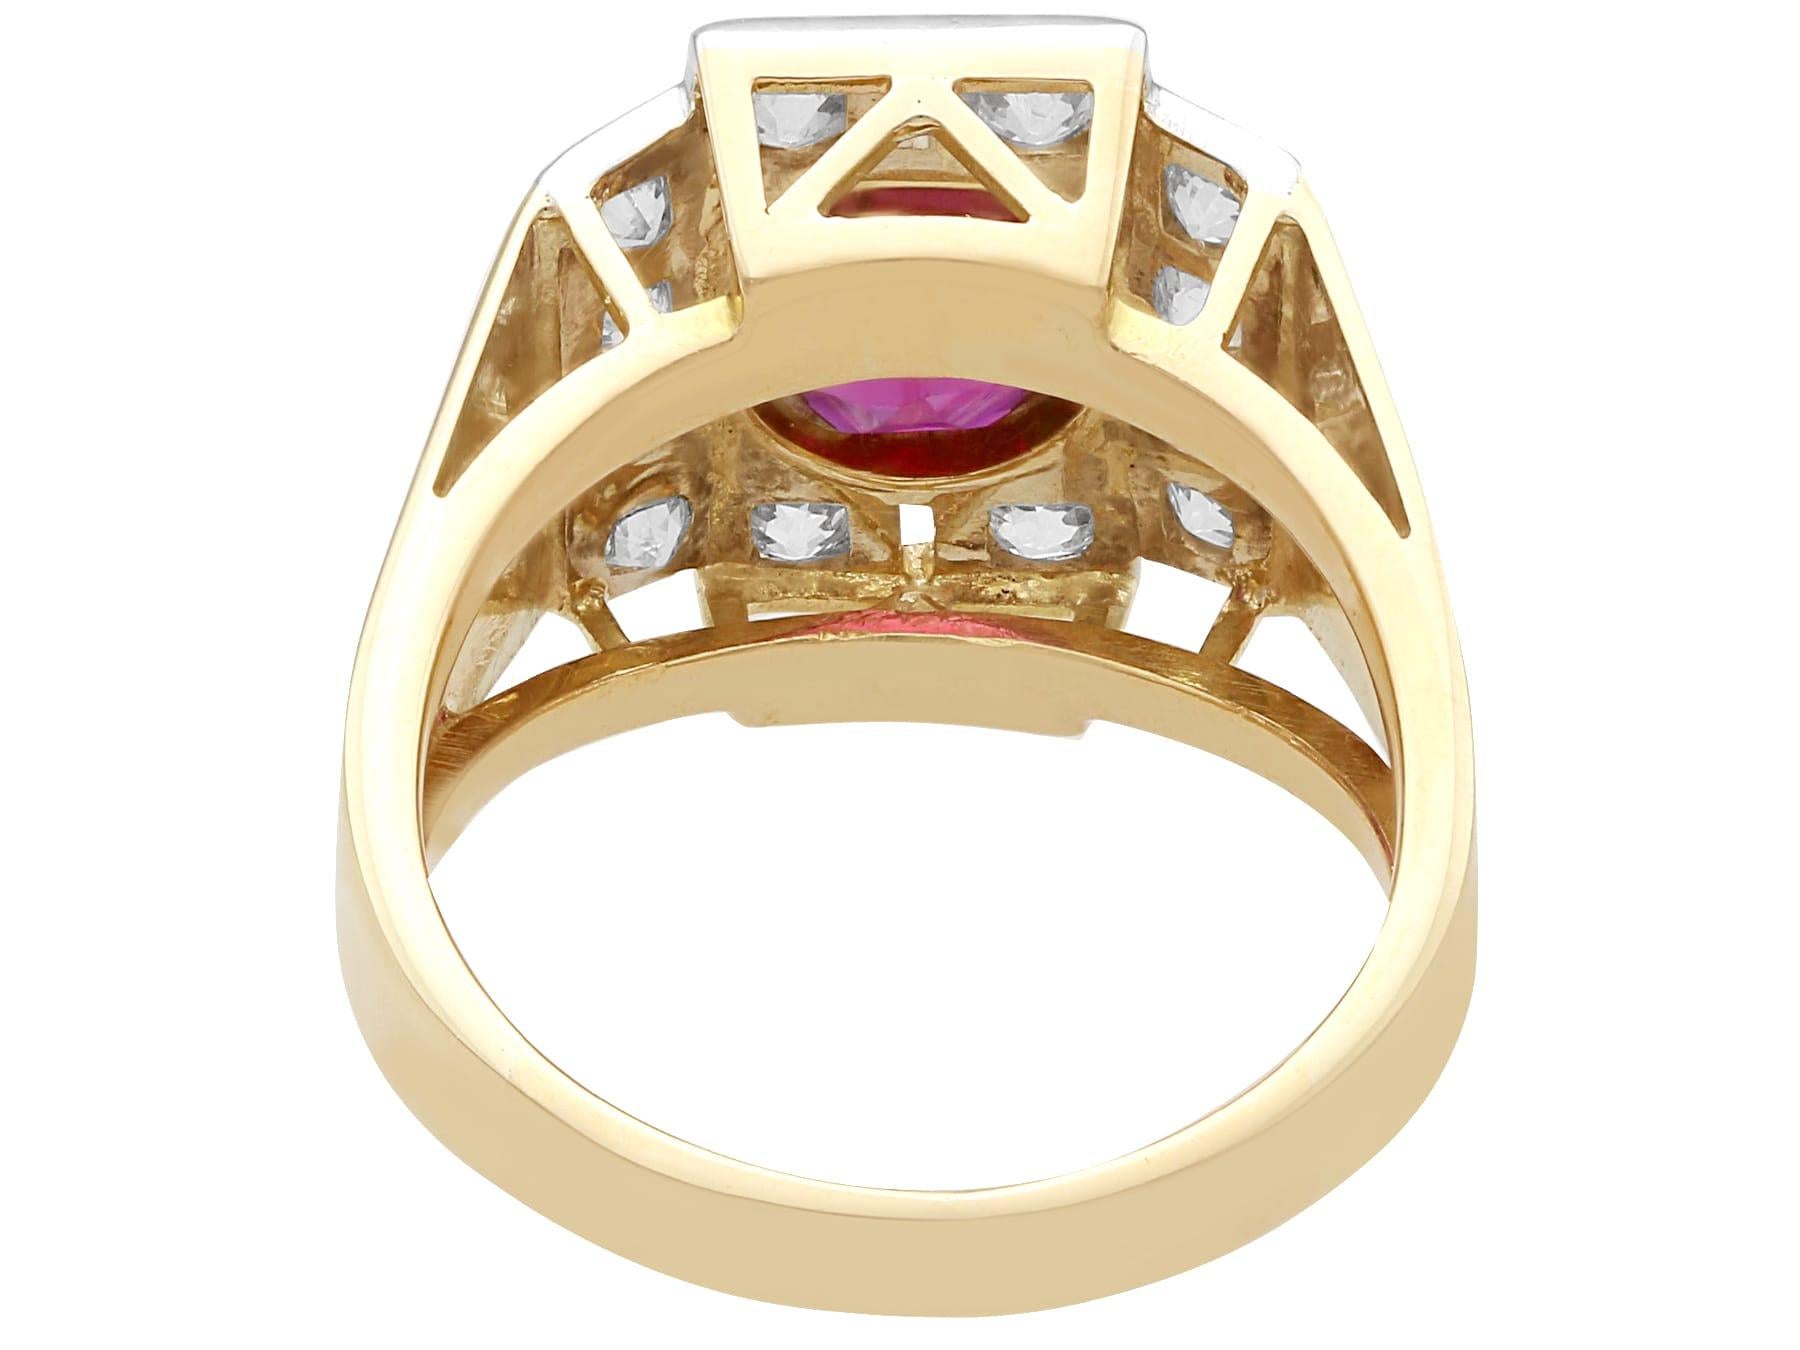 Vintage 2.84 Carat Thai Ruby and 1.45 Carat Diamond Yellow Gold Dress Ring In Excellent Condition For Sale In Jesmond, Newcastle Upon Tyne